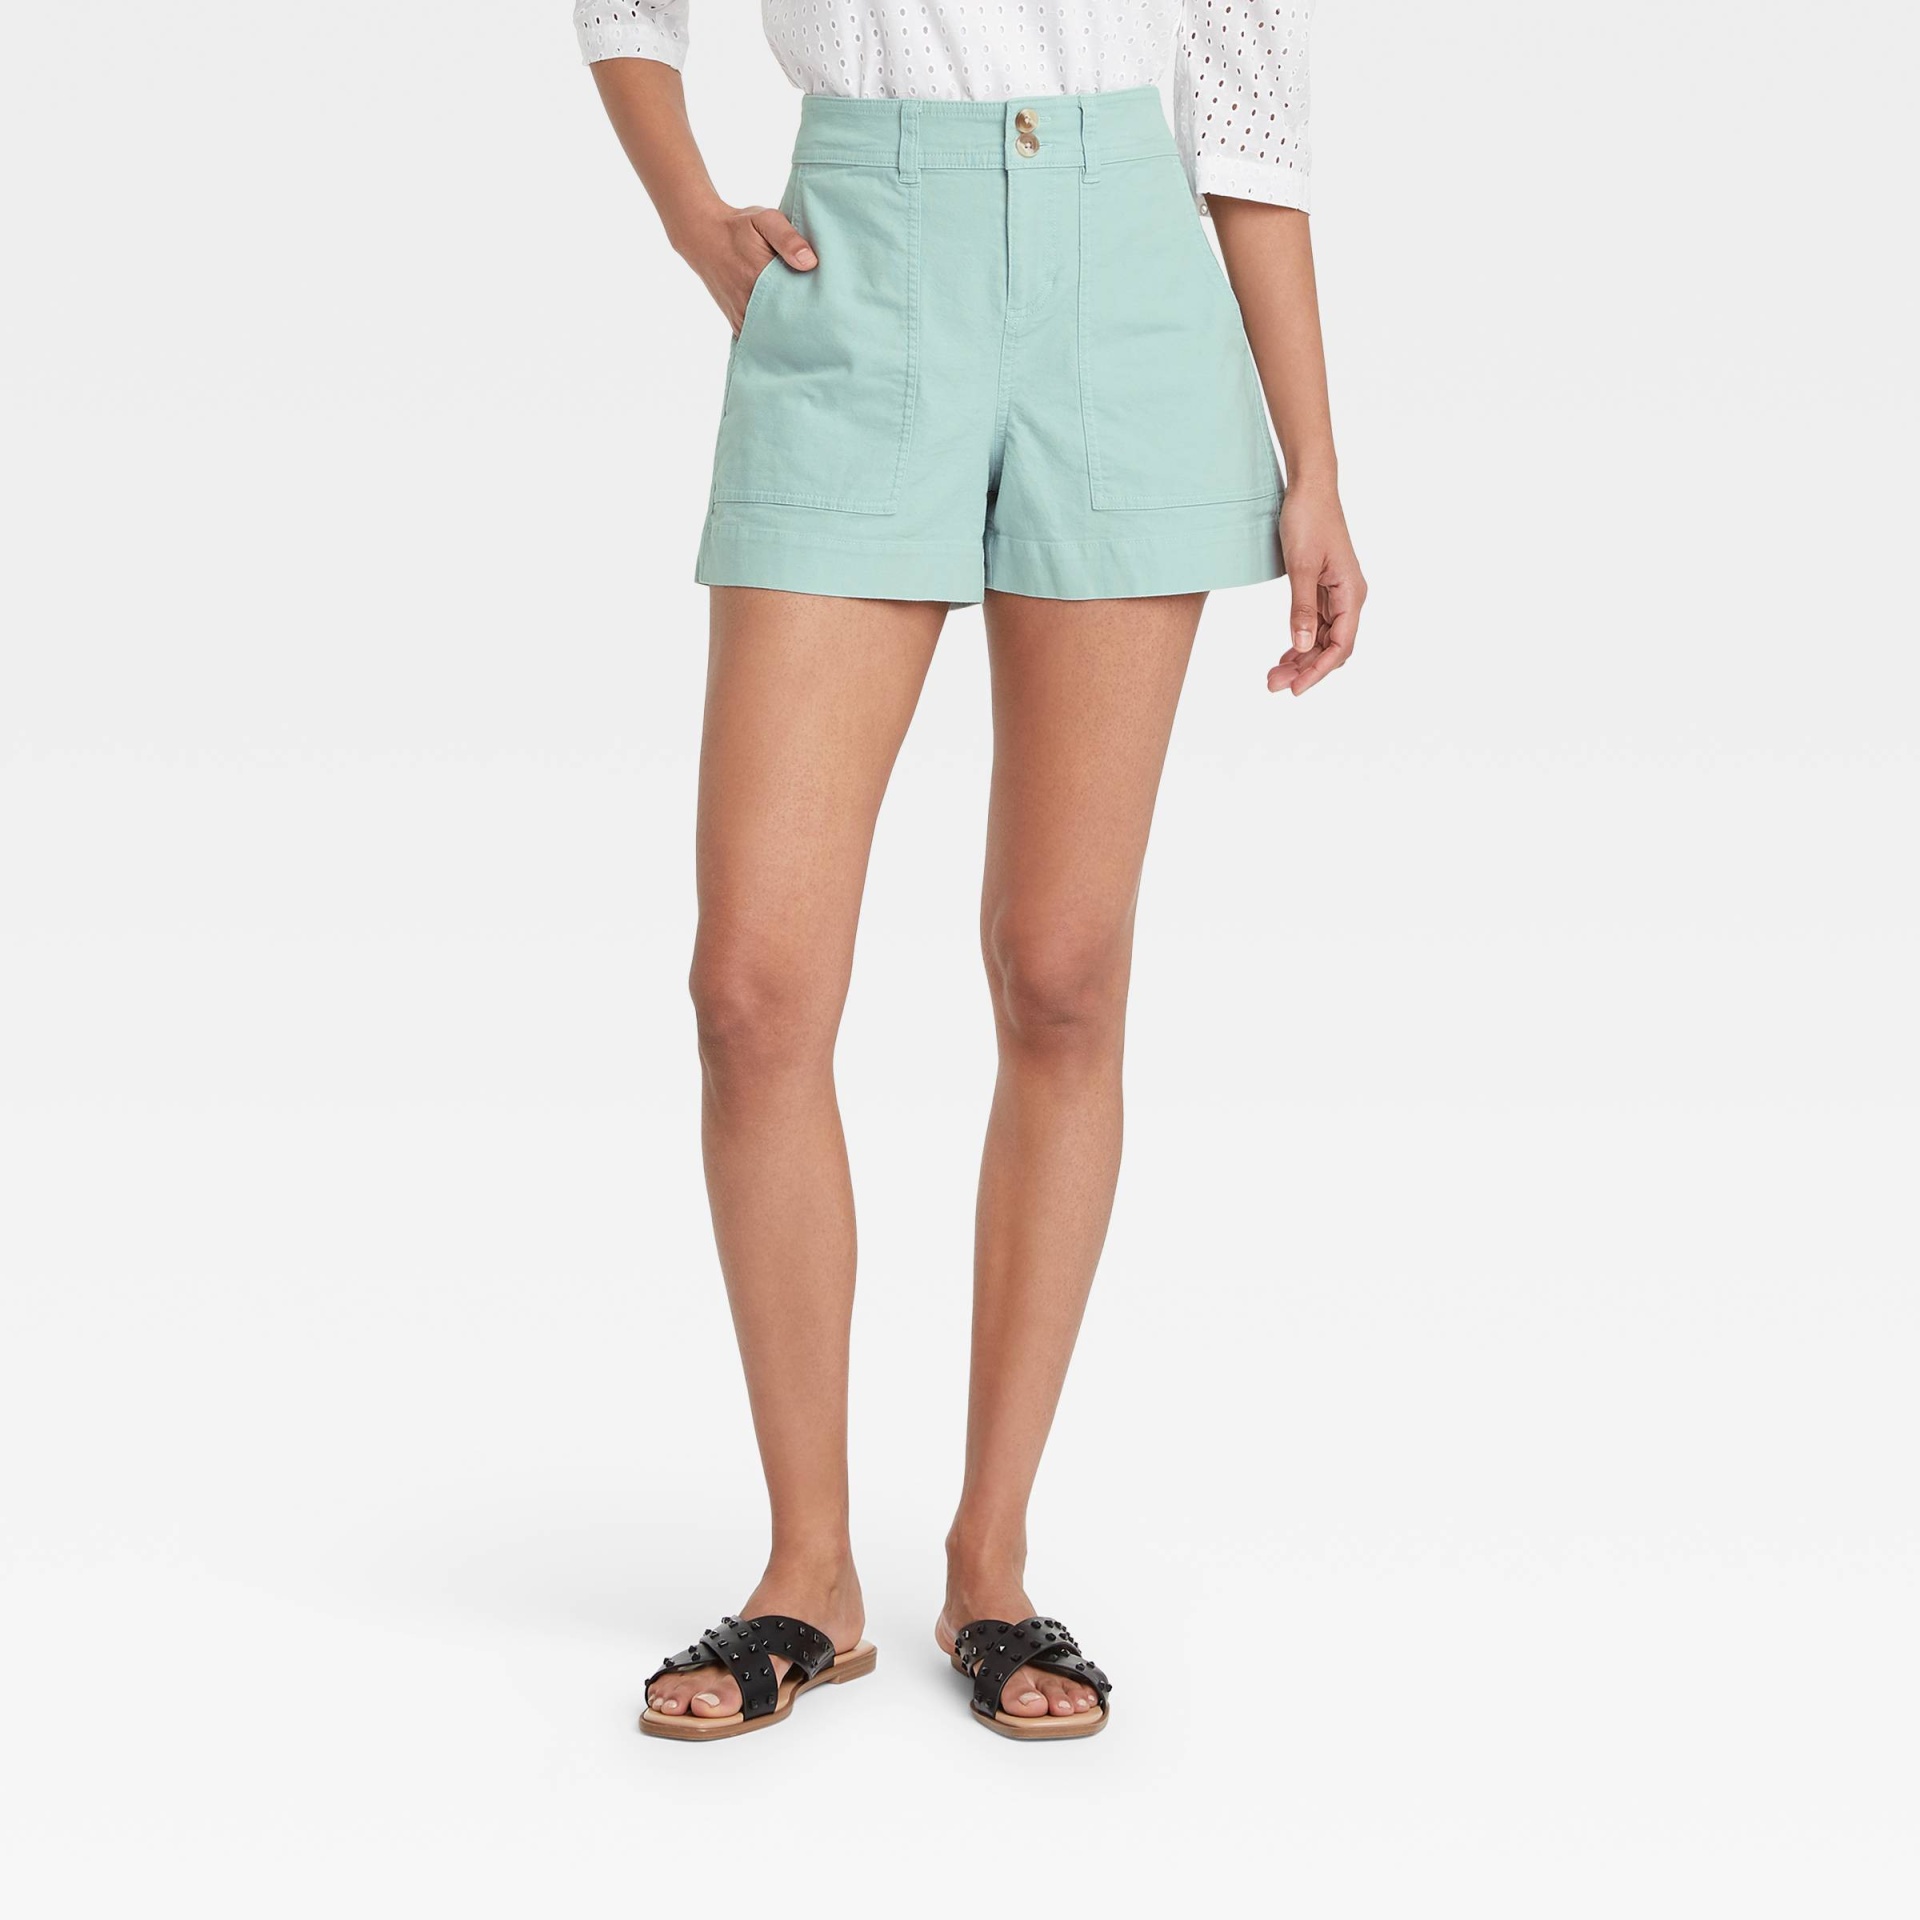 slide 1 of 3, Women's High-Rise Shorts - A New Day Mint 18, 1 ct